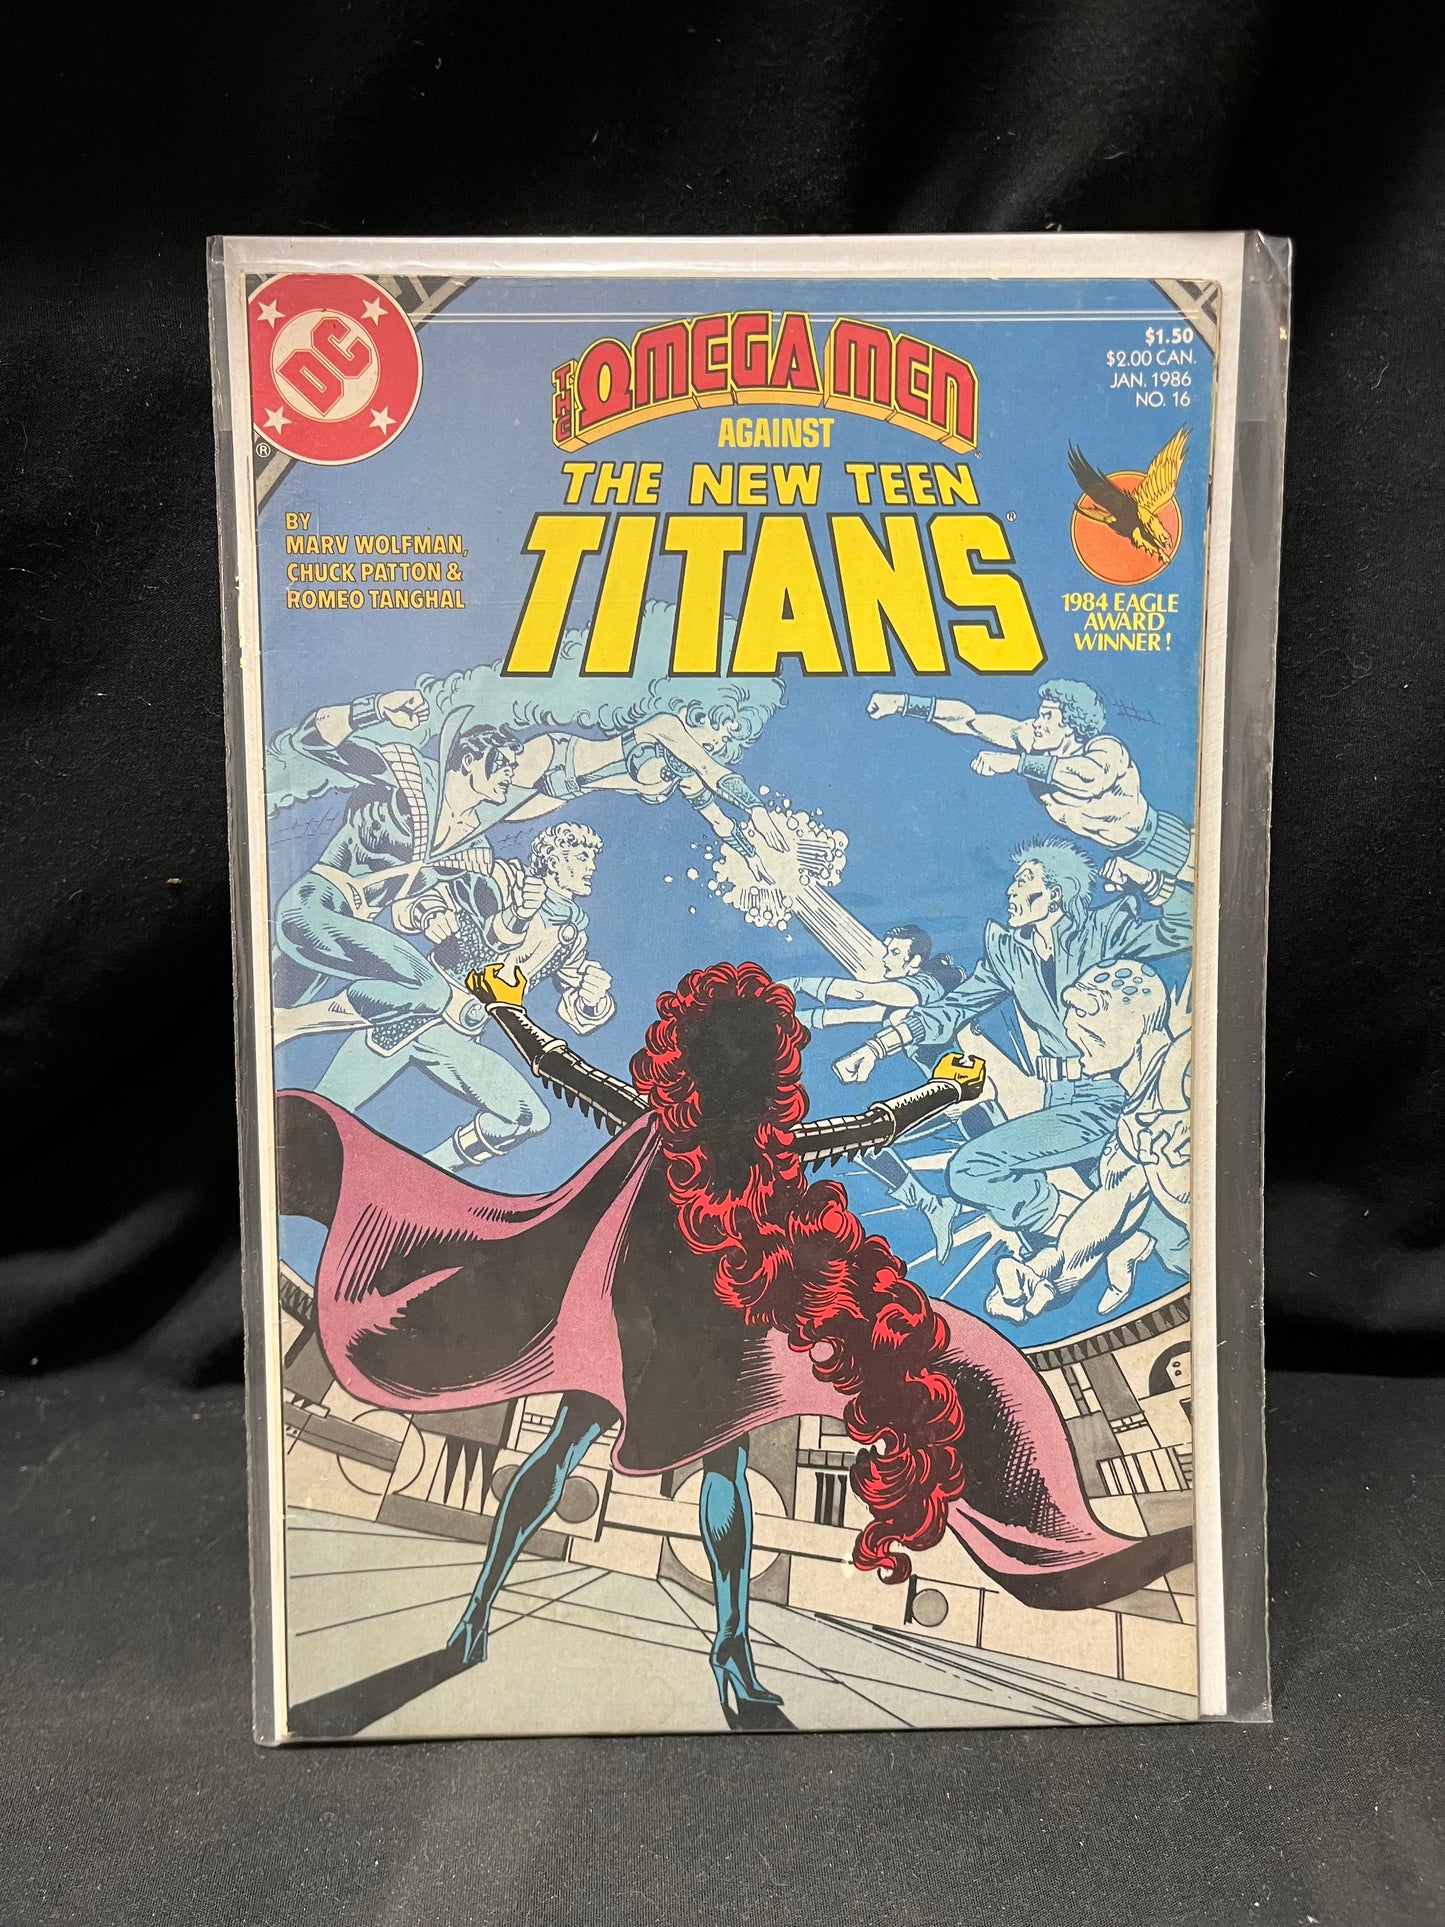 The New Teen Titans Comic Book - No. 16 The Omega Men Against